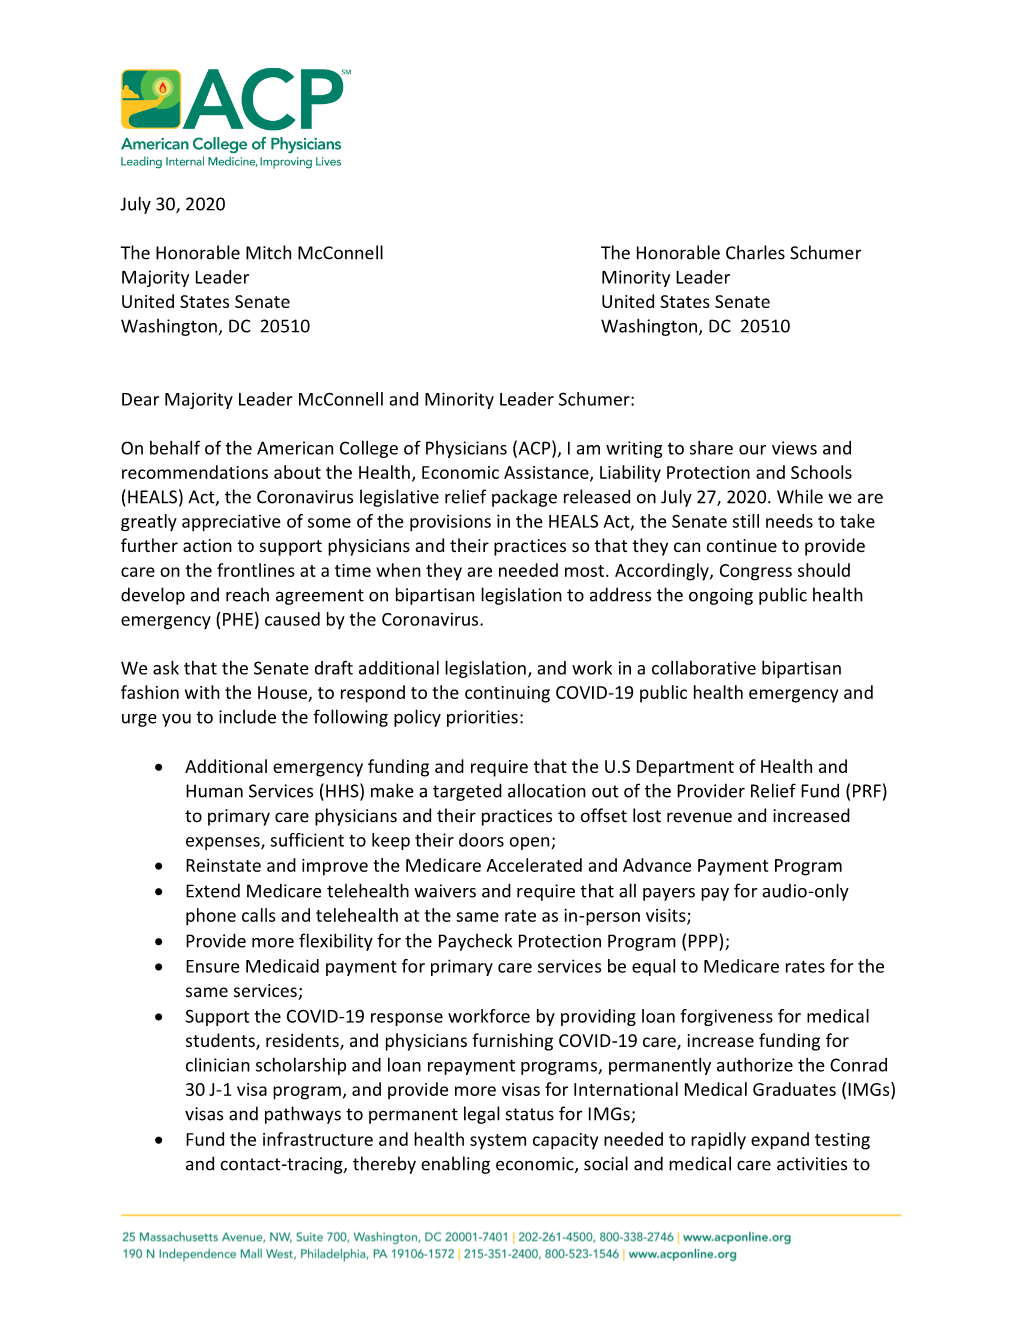 ACP Letter to Senate Leadership About Recommendations for The